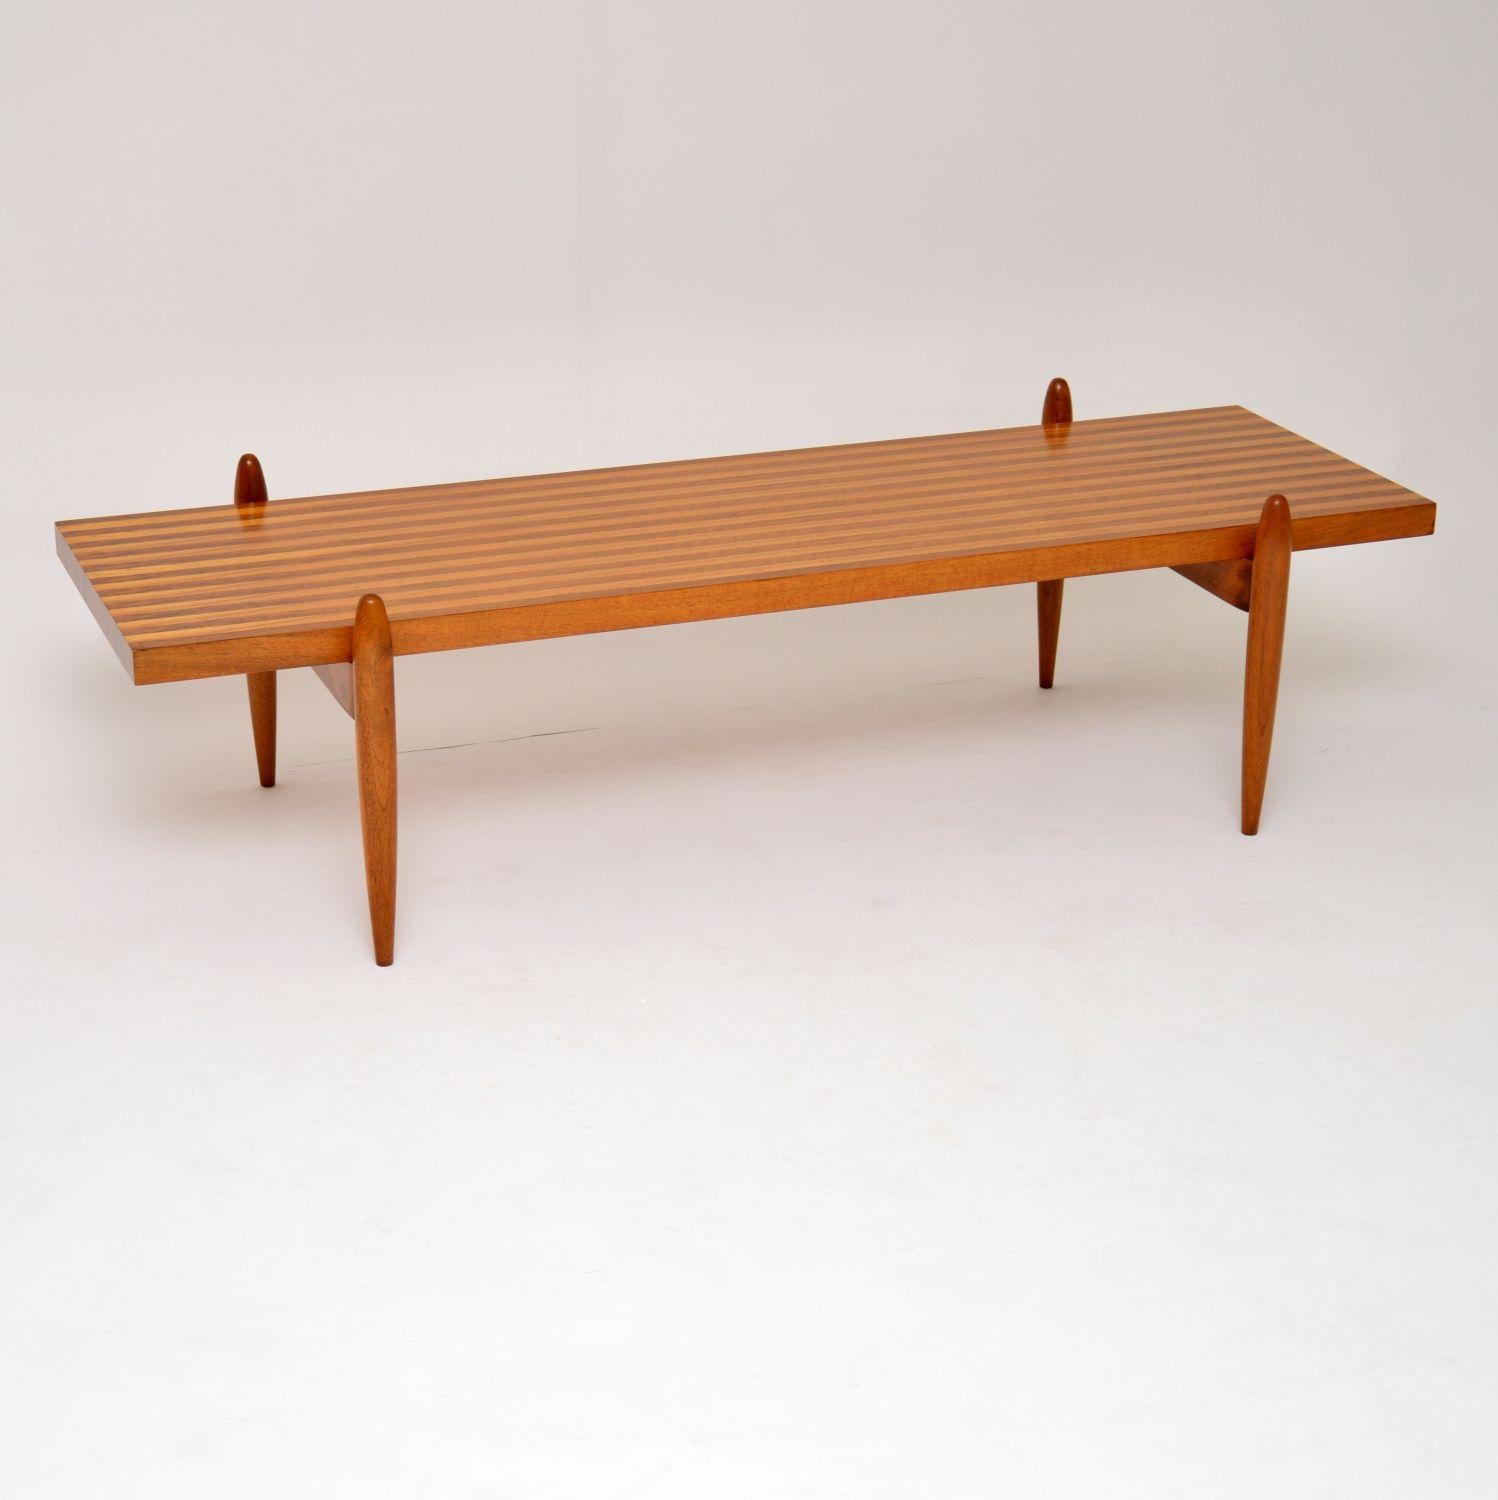 A stunning and rare vintage coffee table with an absolutely amazing design, this was made in Denmark and dates from the 1960s. The top is made from strips of solid walnut and solid elm, and it sits on a very interesting base. We have had this